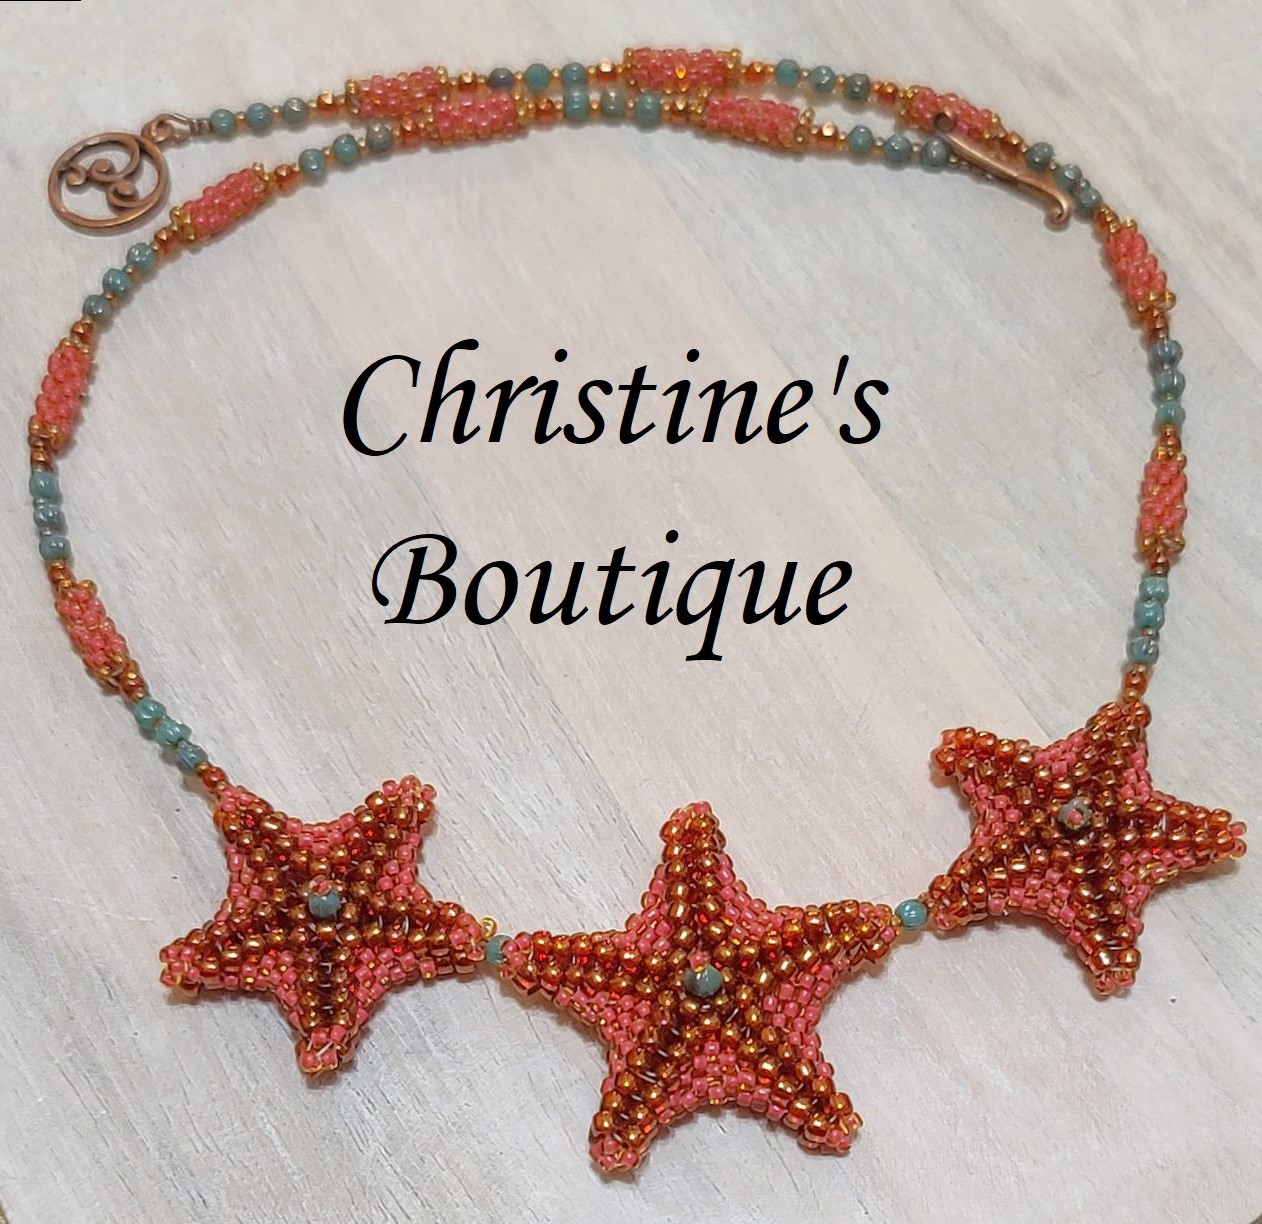 Summer starfish necklace in coral and turquoise